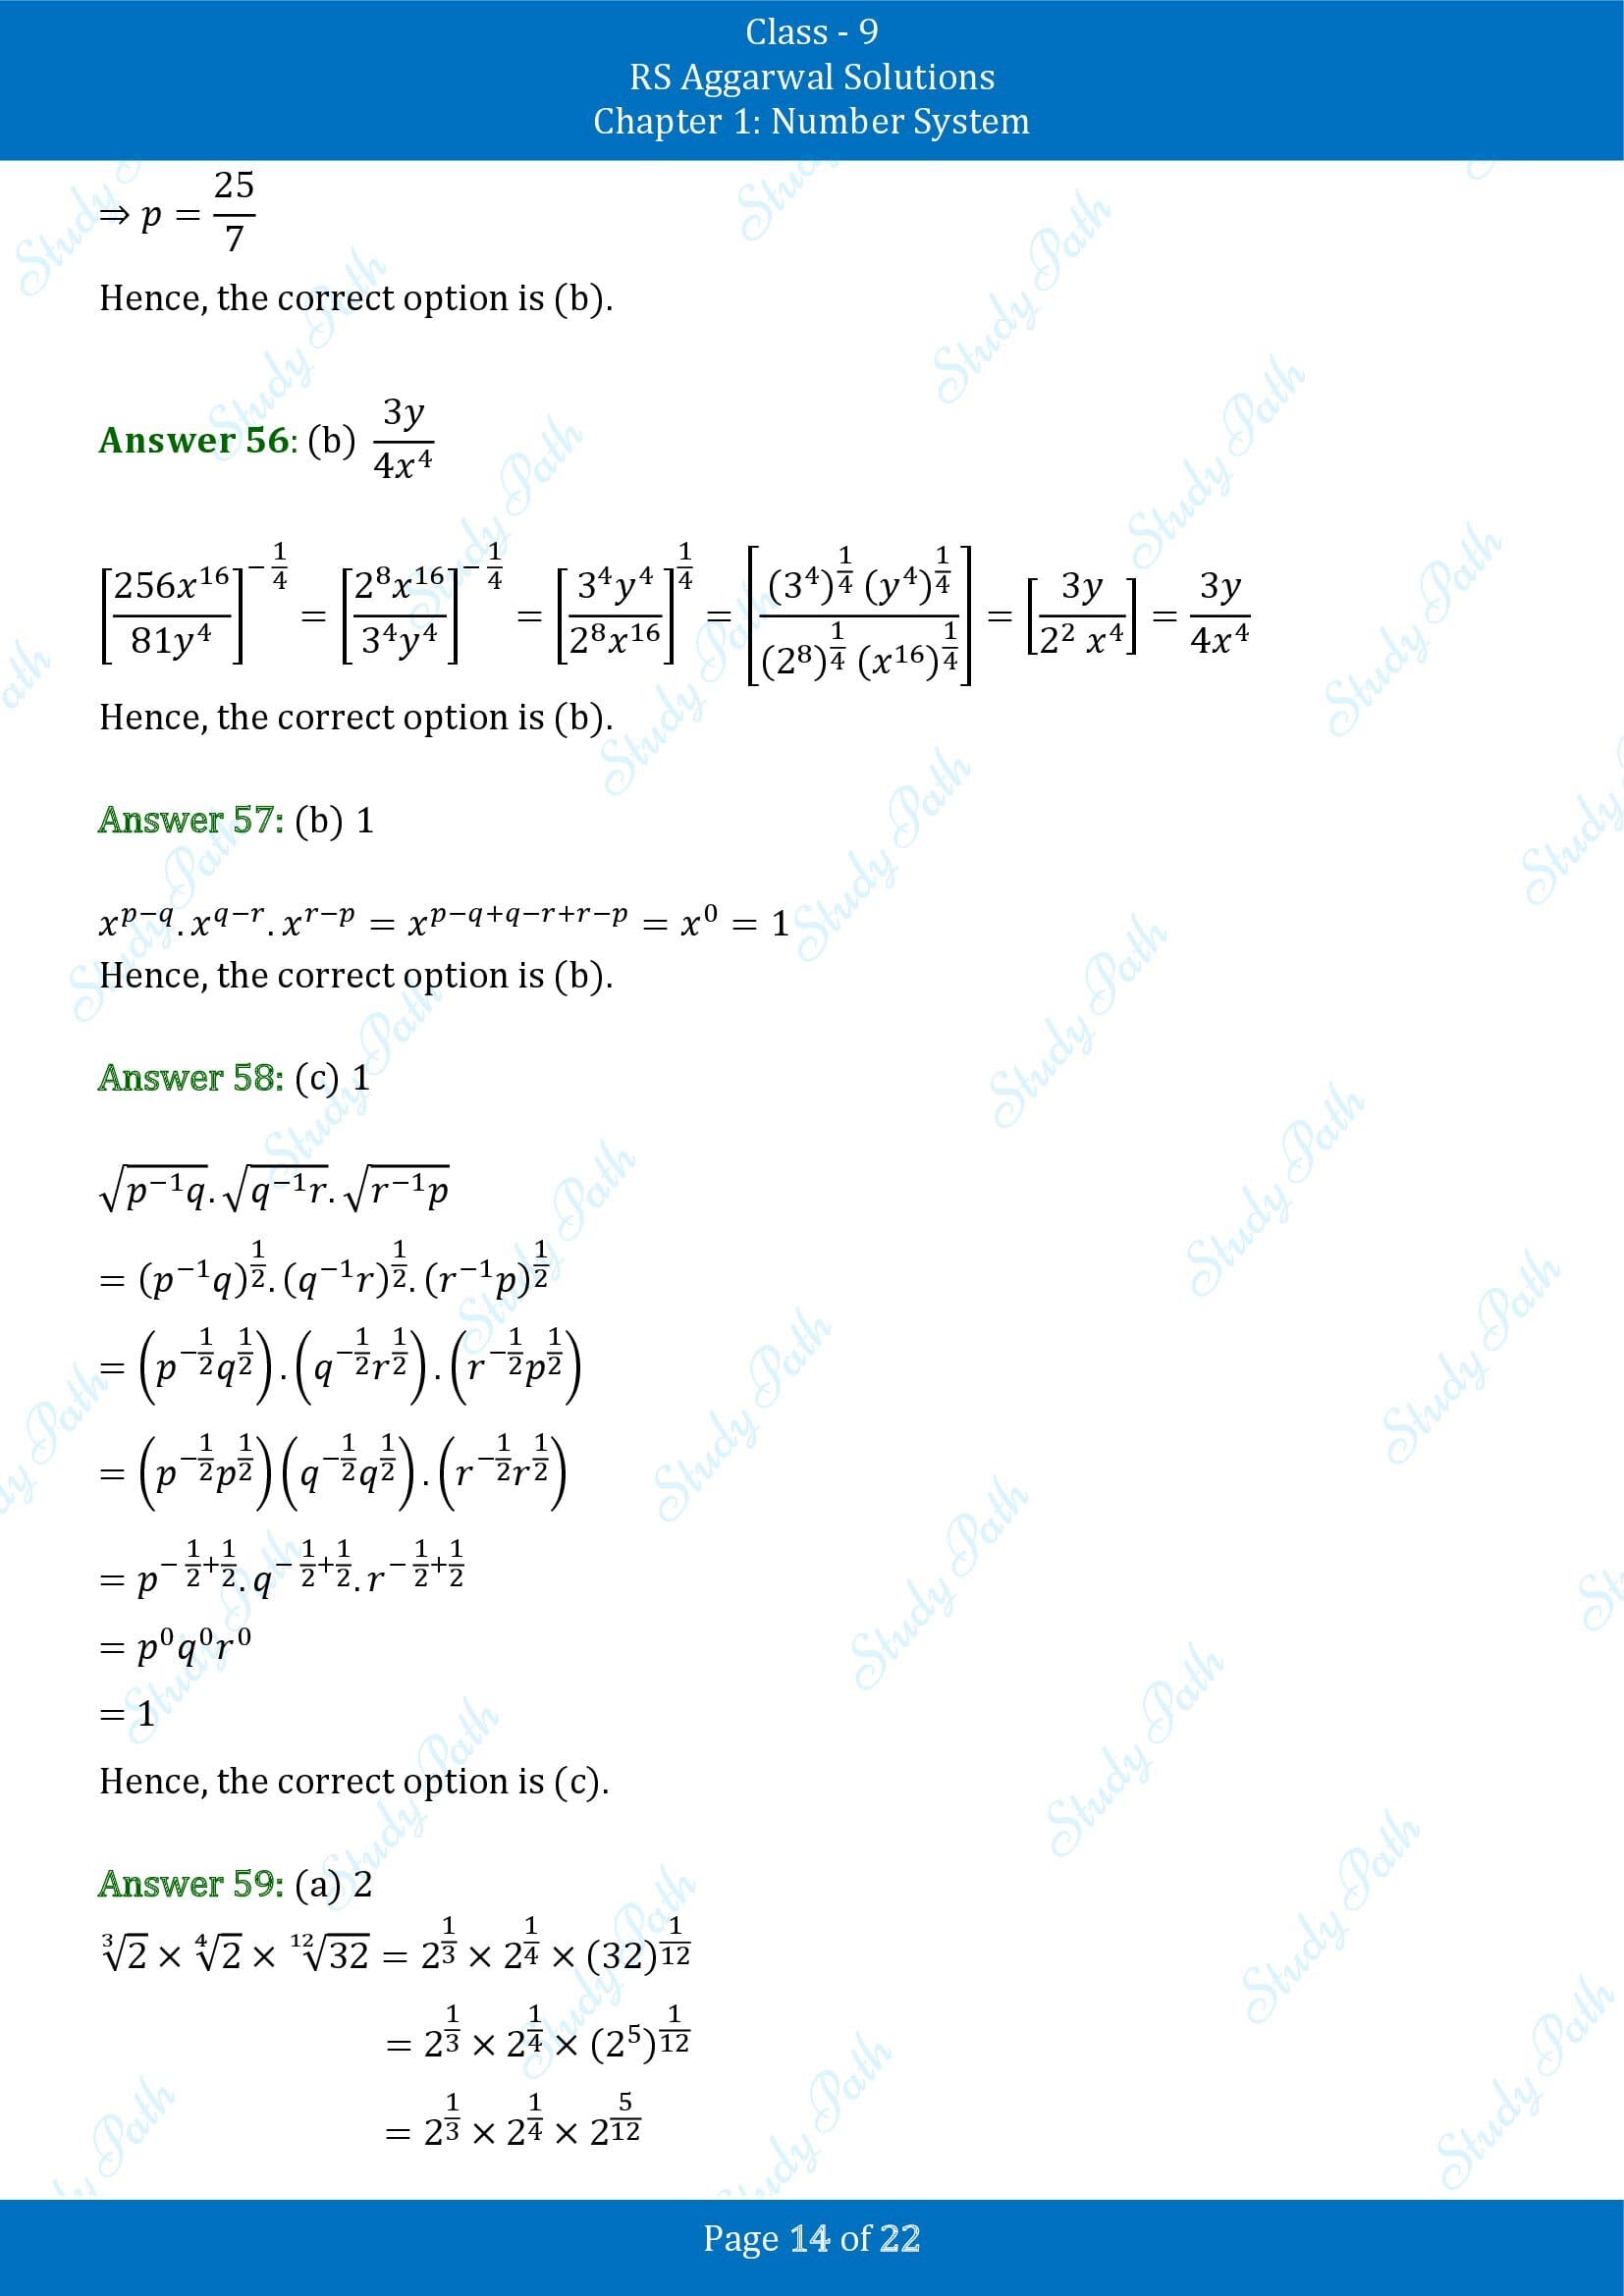 RS Aggarwal Solutions Class 9 Chapter 1 Number System Multiple Choice Questions MCQs 00014